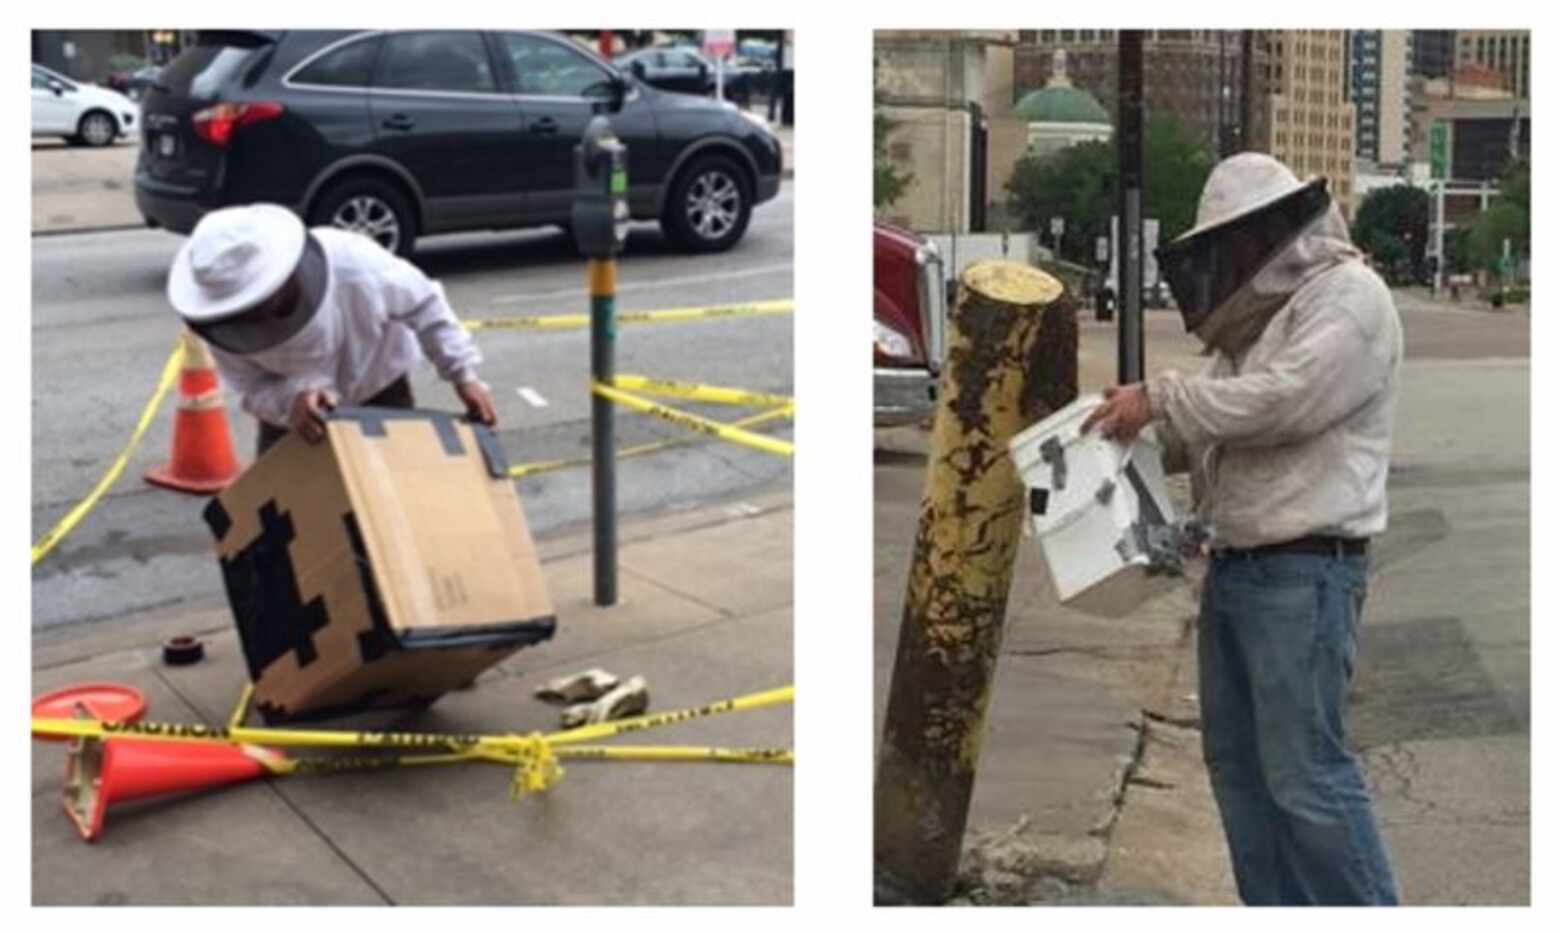 Two people collect the swarms of bees that gathered on a parking meter and post in downtown...